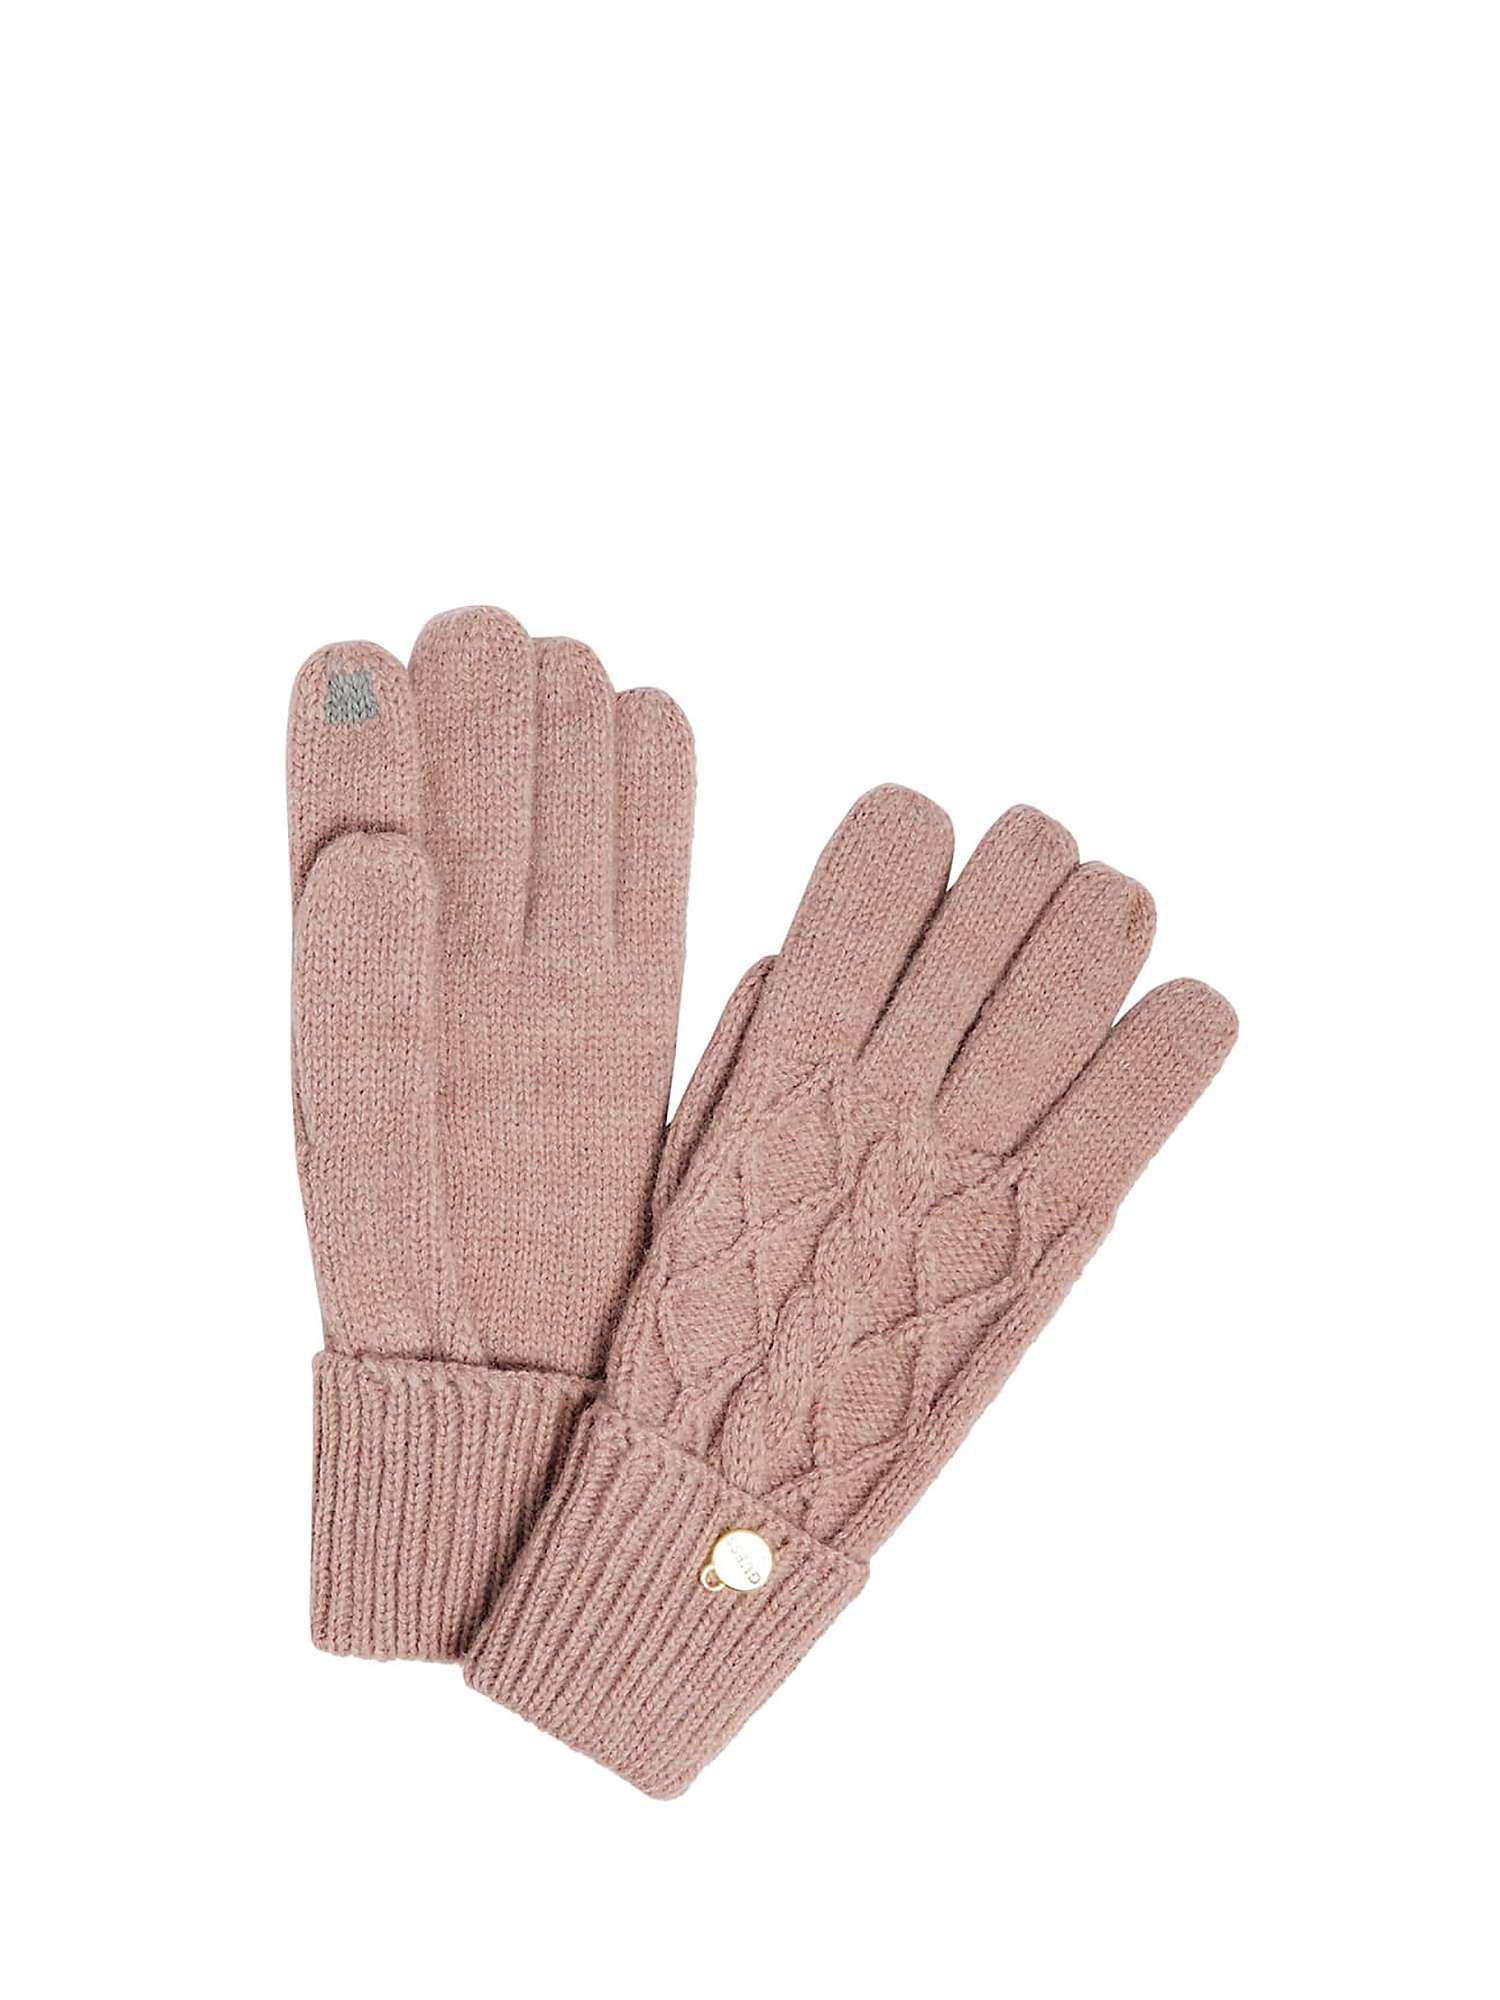 Buy GUESS Cable Knit Gloves Online at johnlewis.com